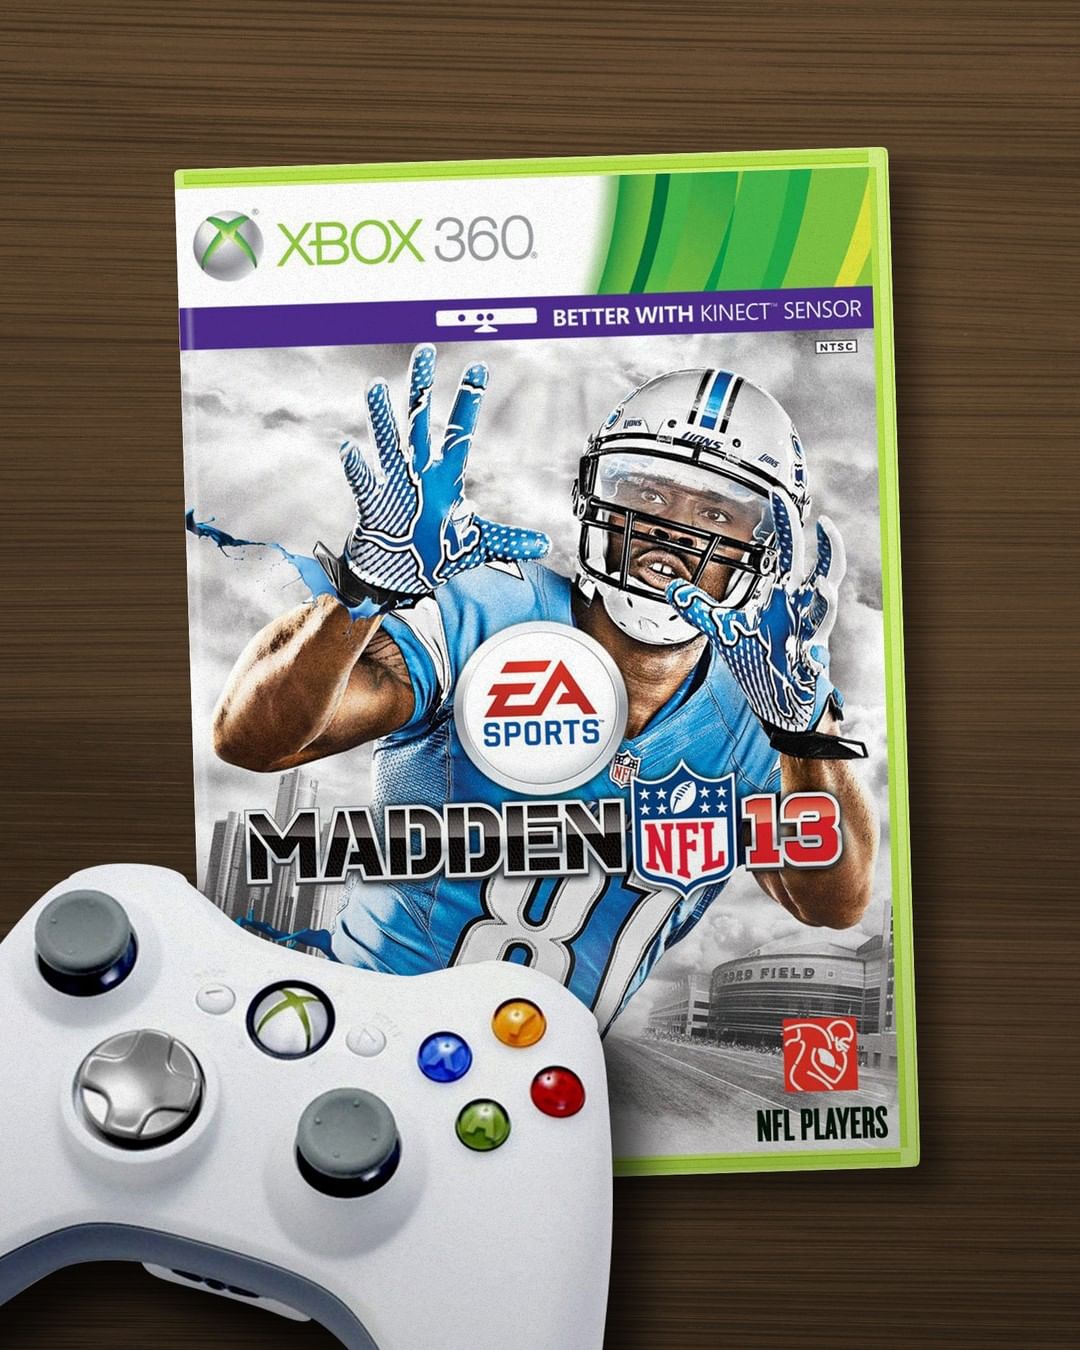 #TBT to when @megatron was on the cover of Madden!...